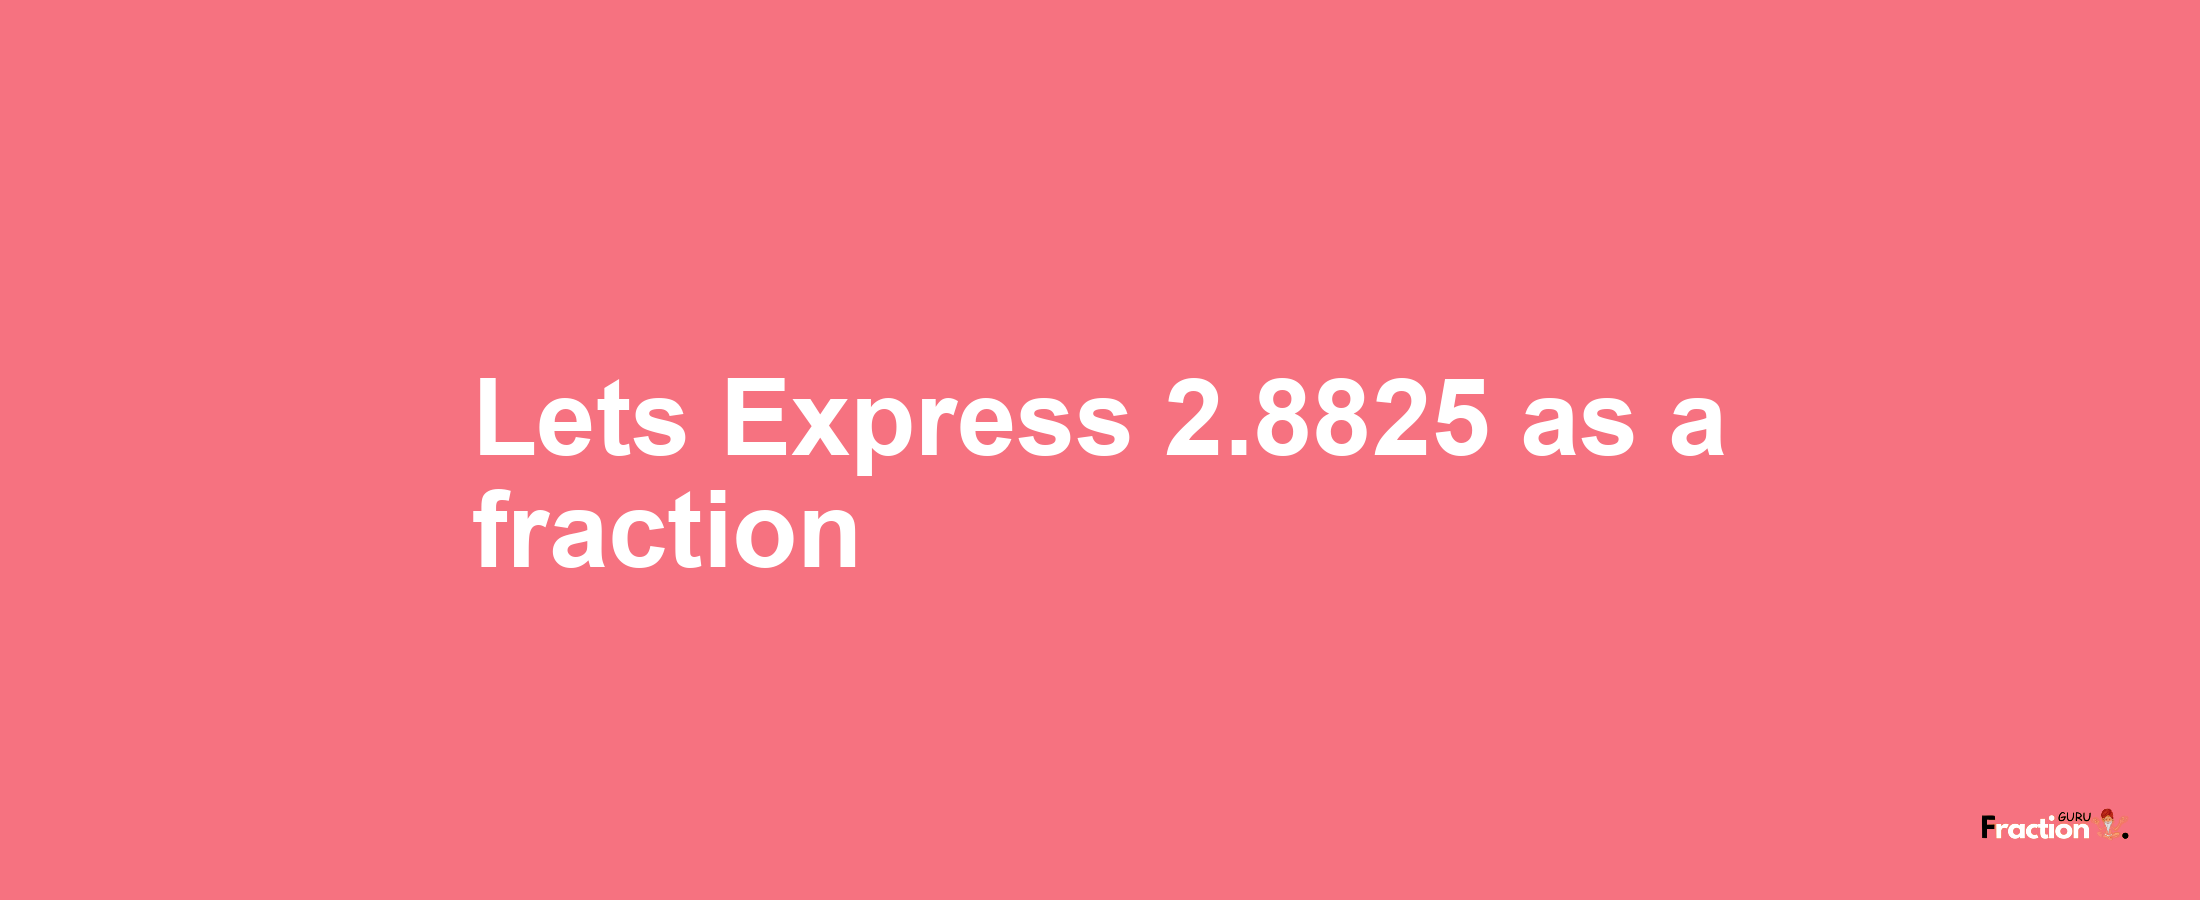 Lets Express 2.8825 as afraction